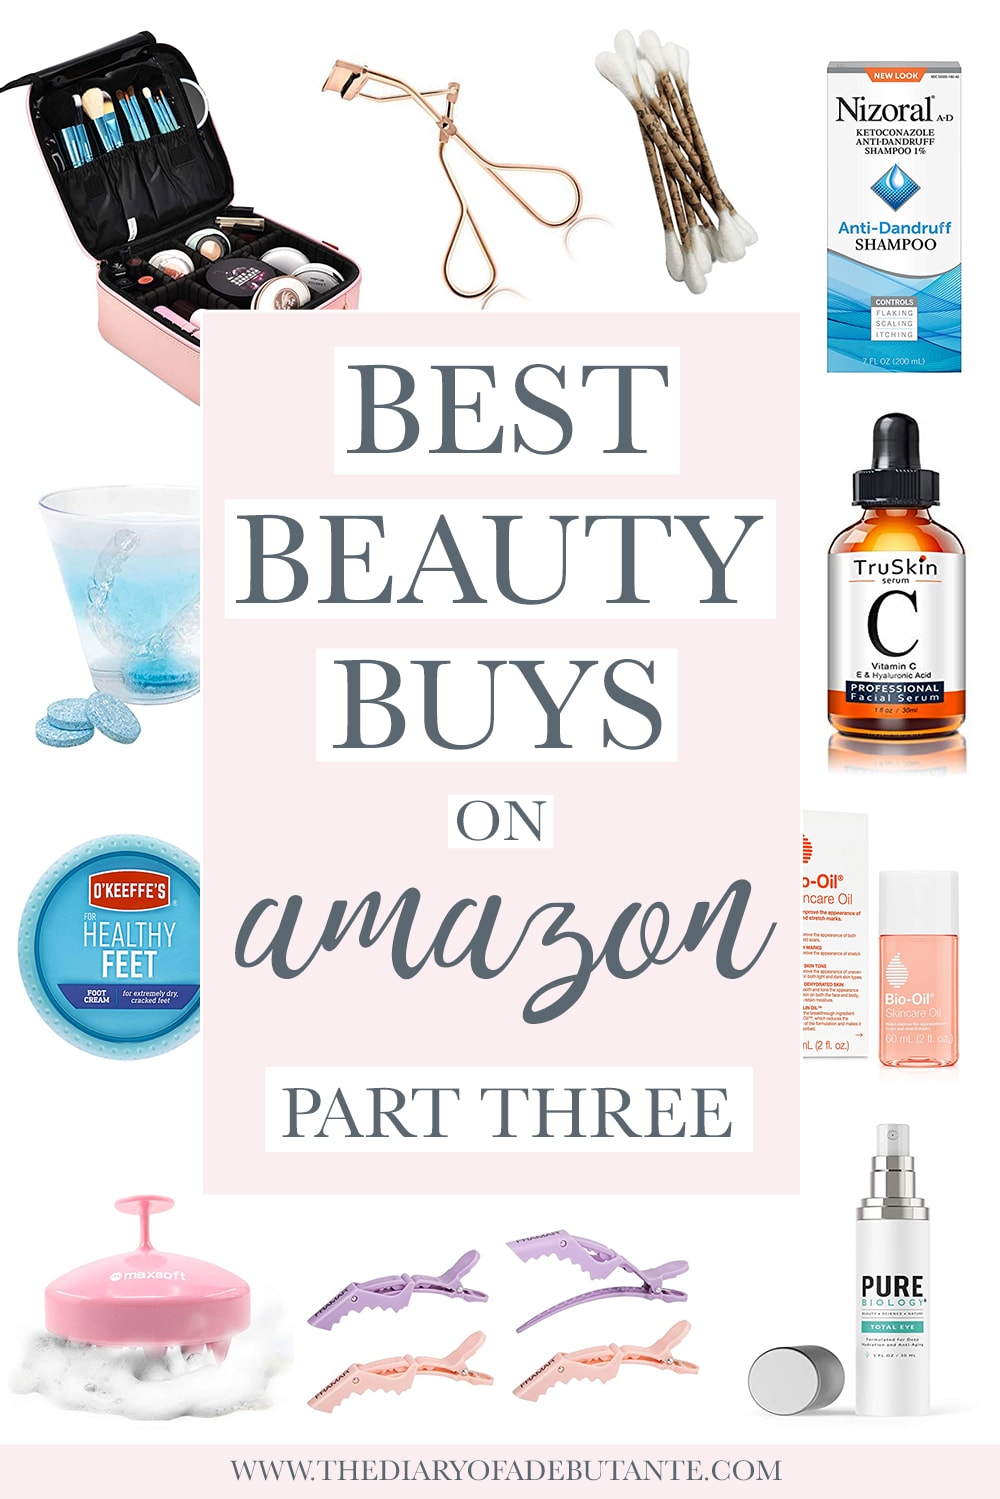 Beauty blogger Stephanie Ziajka shares Part Three of the top beauty products on Amazon on Diary of a Debutante